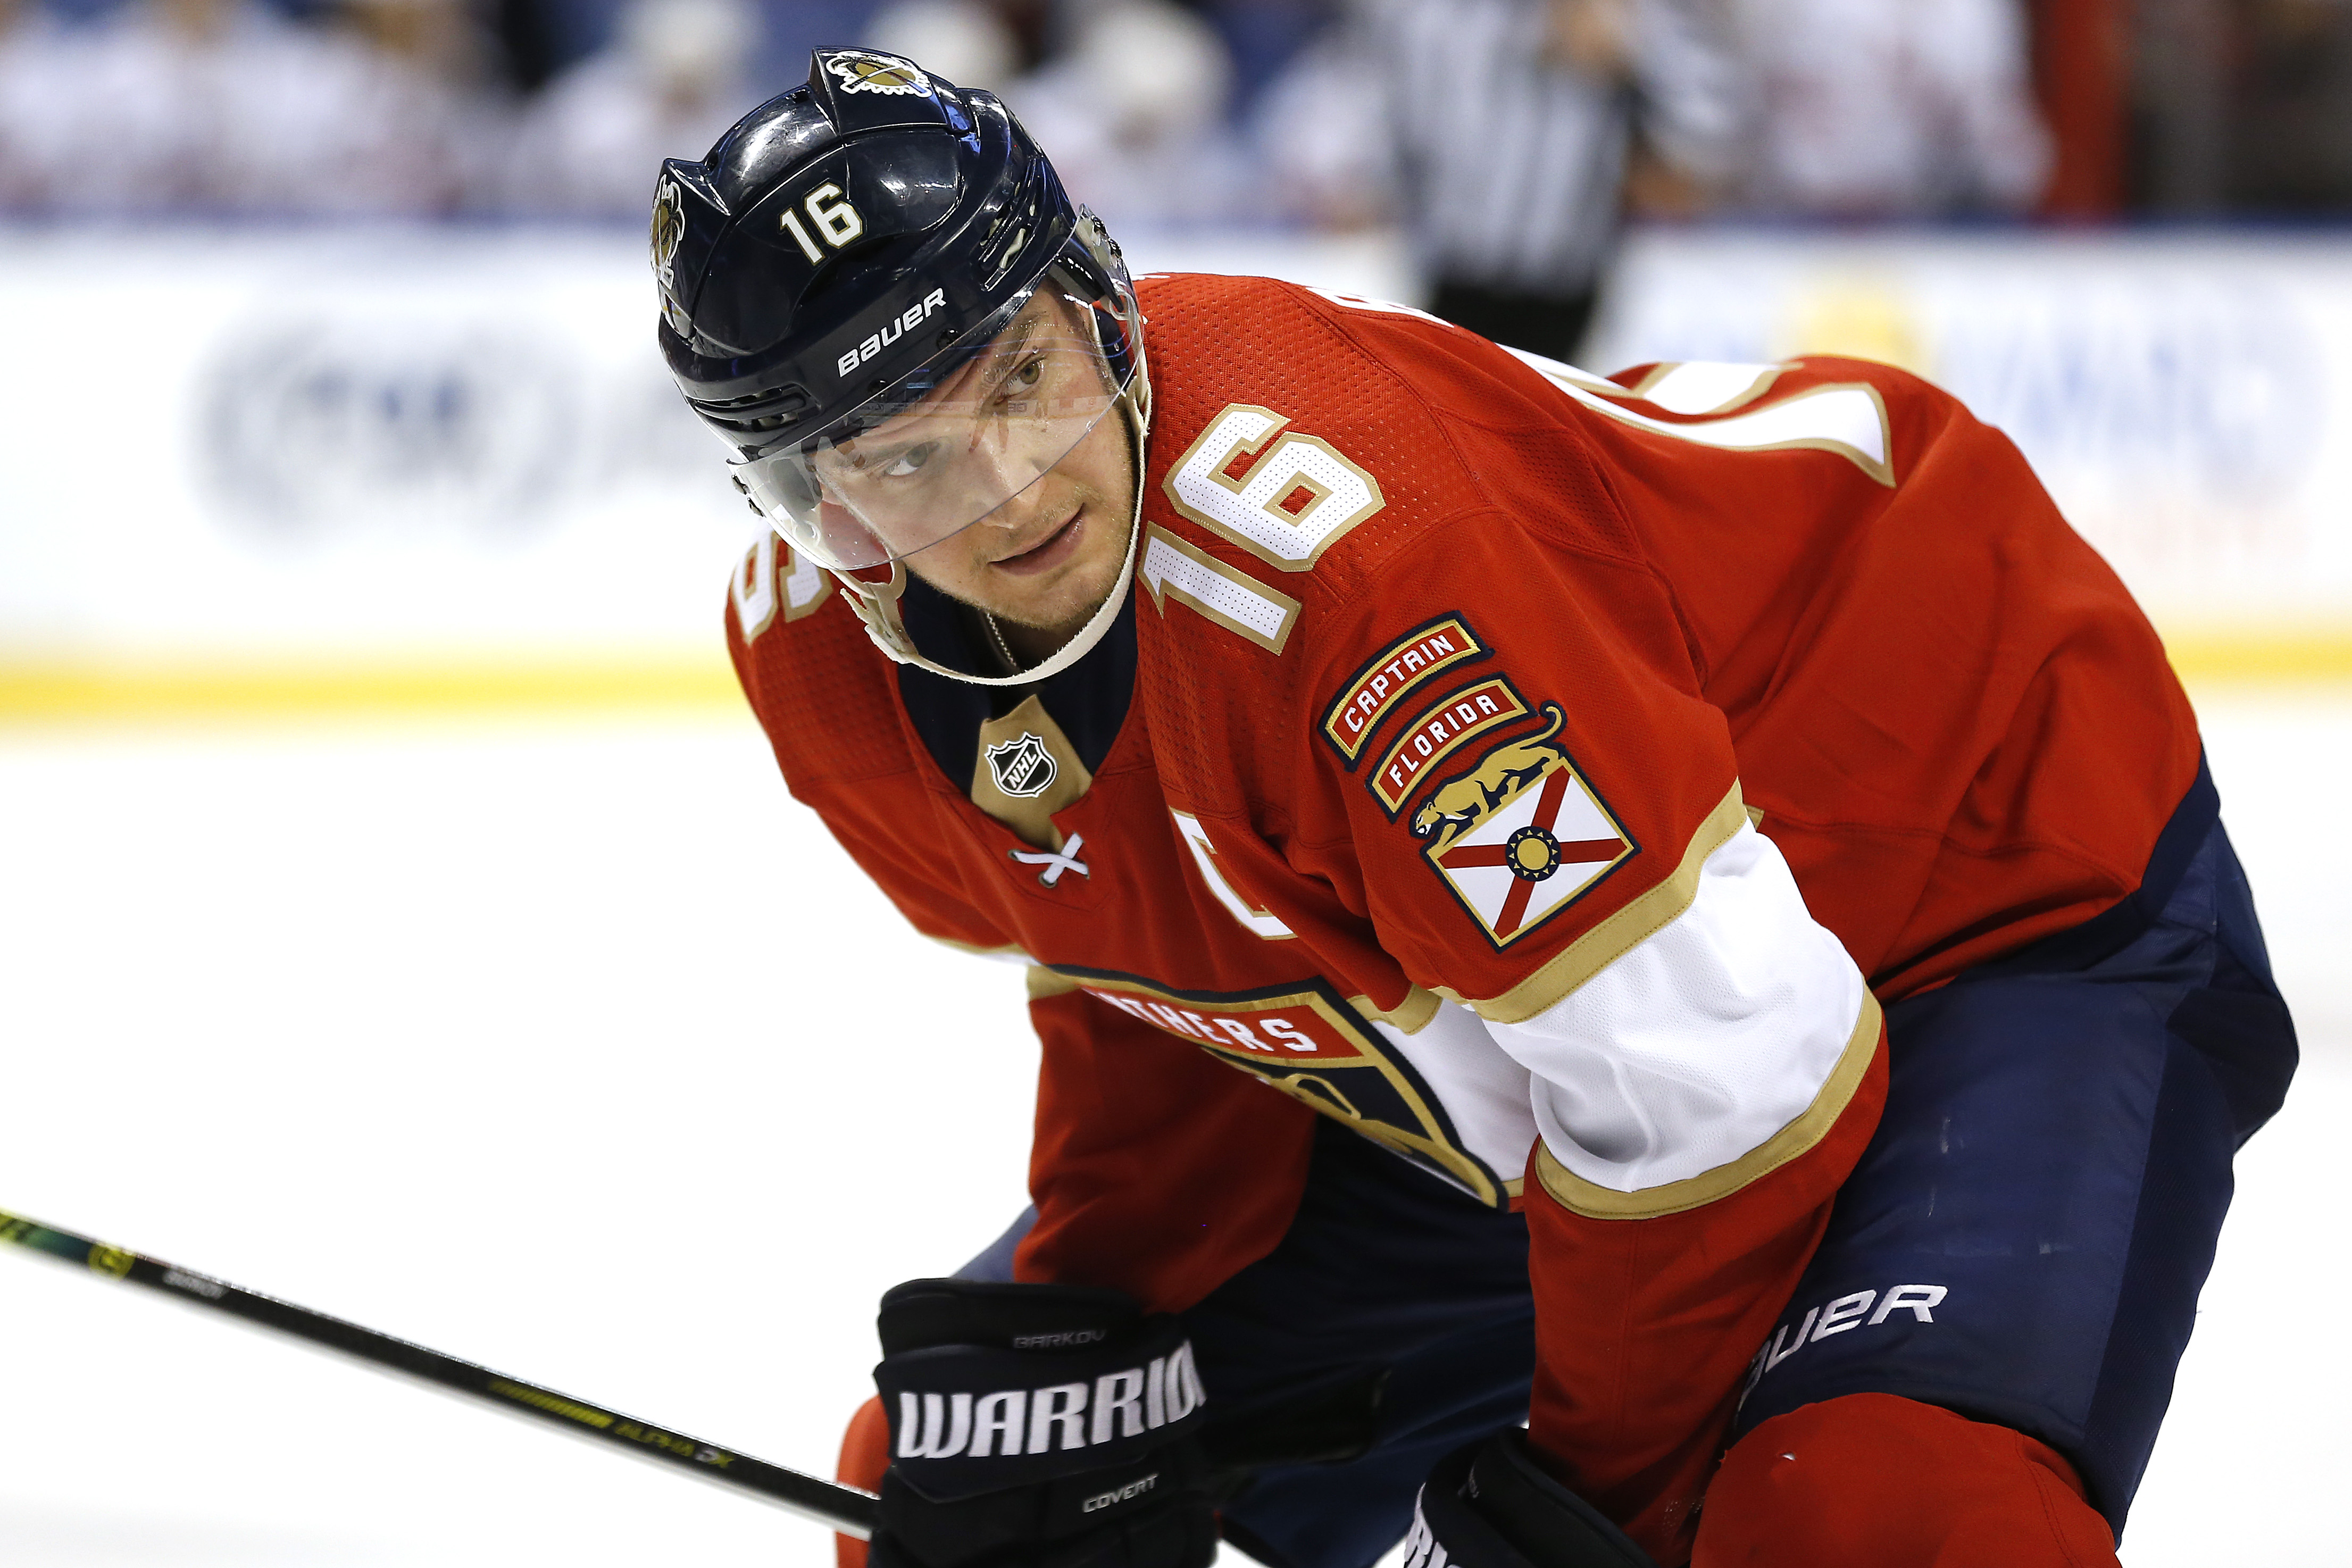 Anton Lundell impresses in NHL debut as Florida Panthers beat Penguins